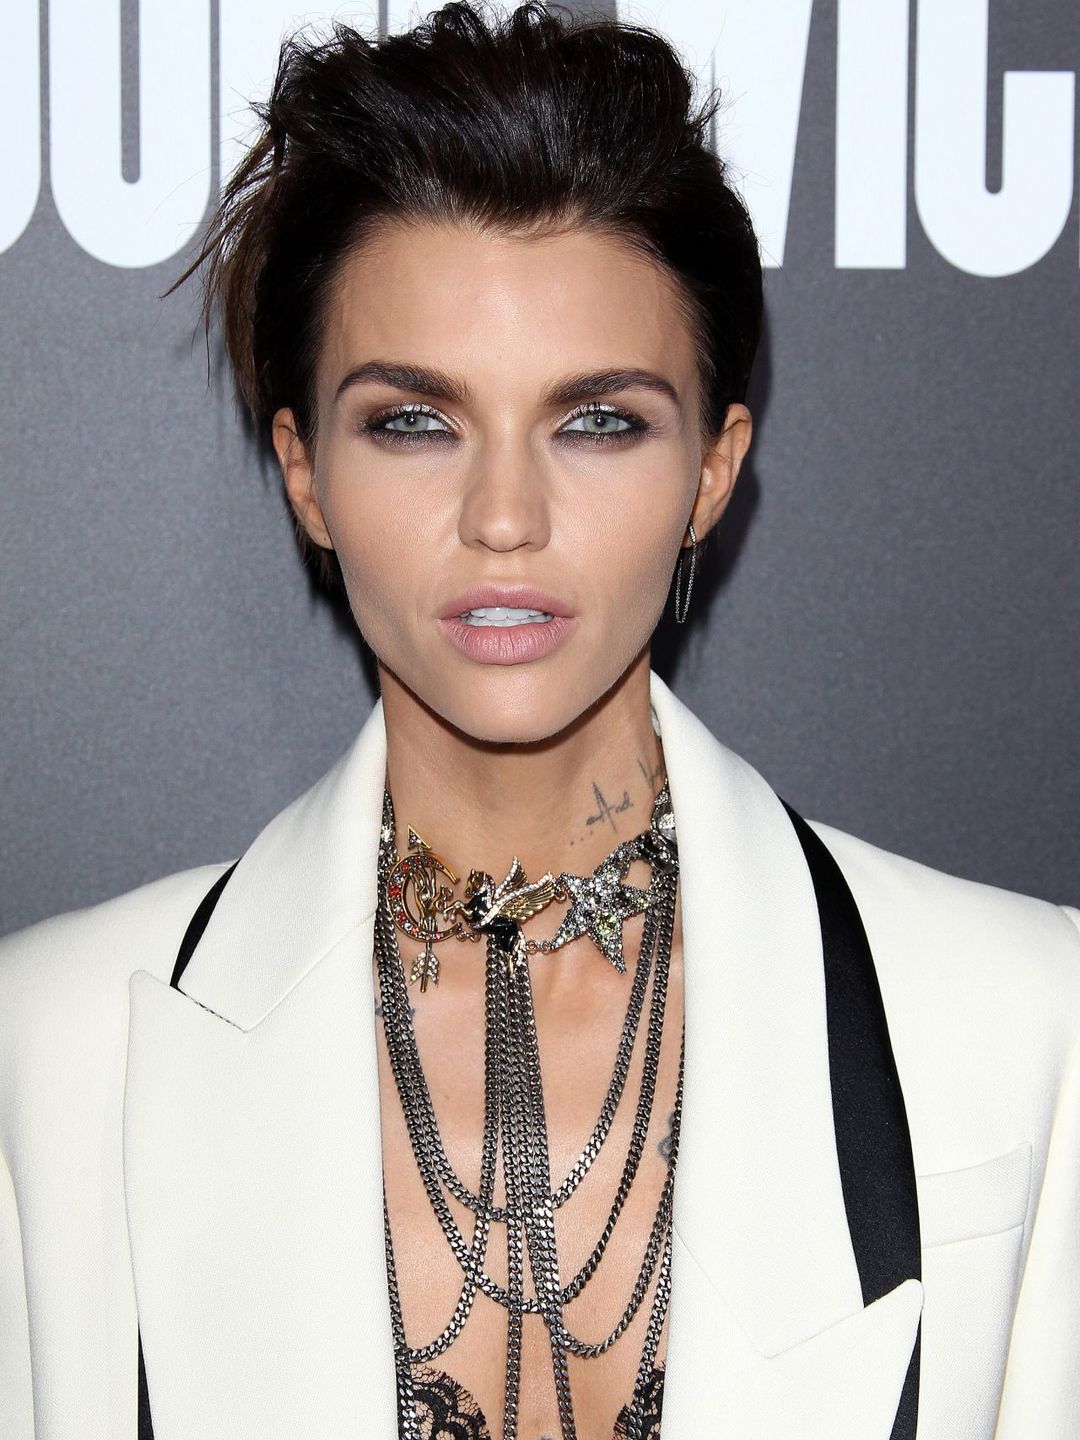 Ruby Rose young pics